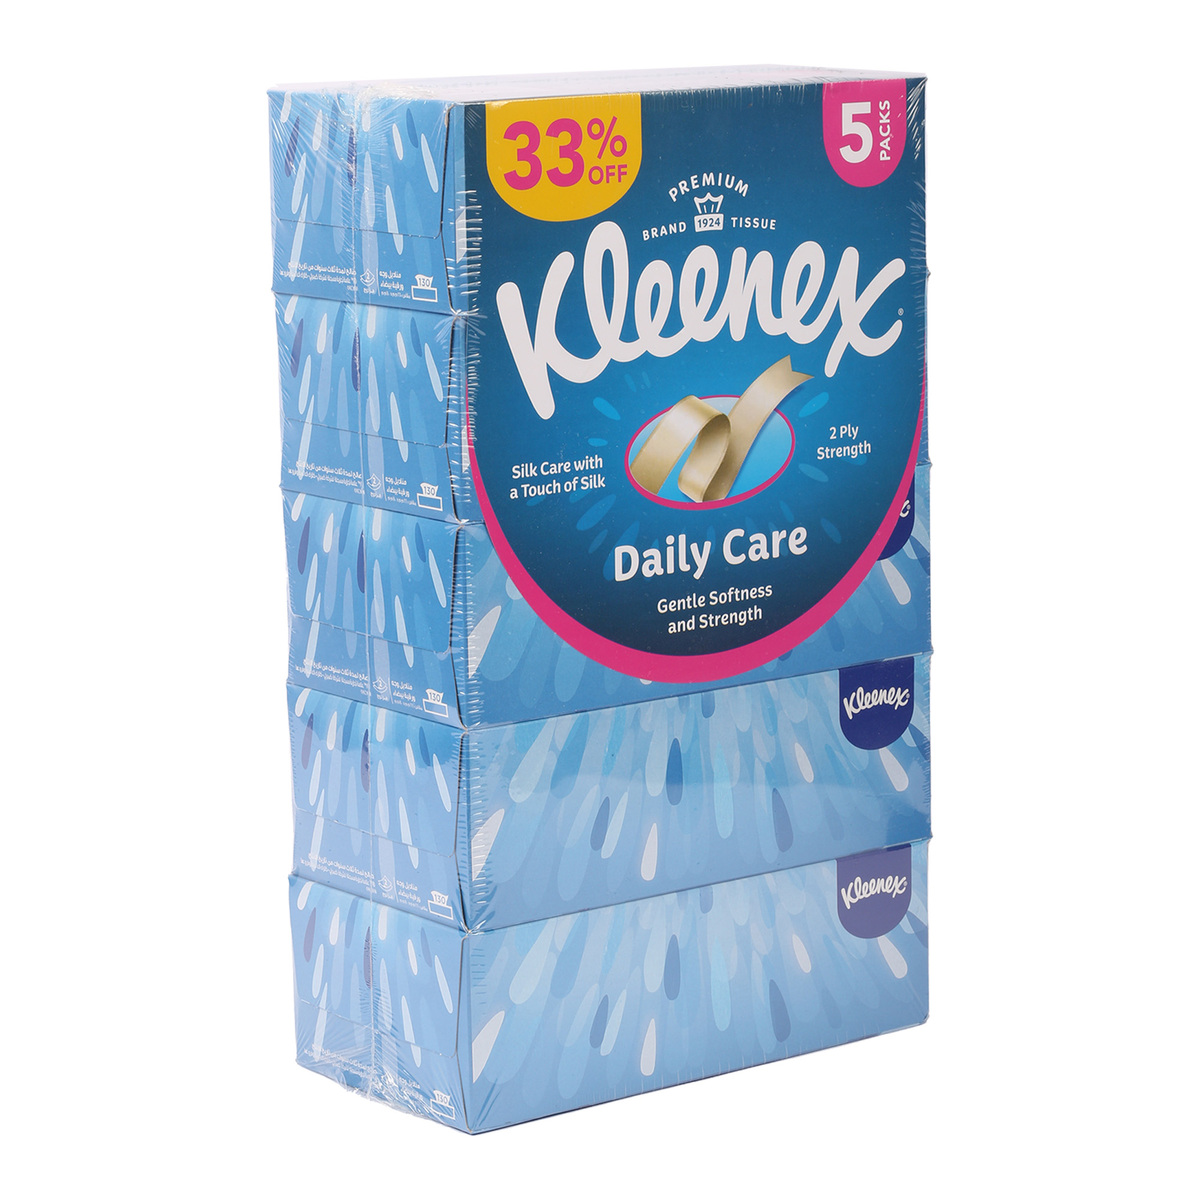 Kleenex Daily Care Facial Tissue 2ply Value Pack 5 x 130 Sheets